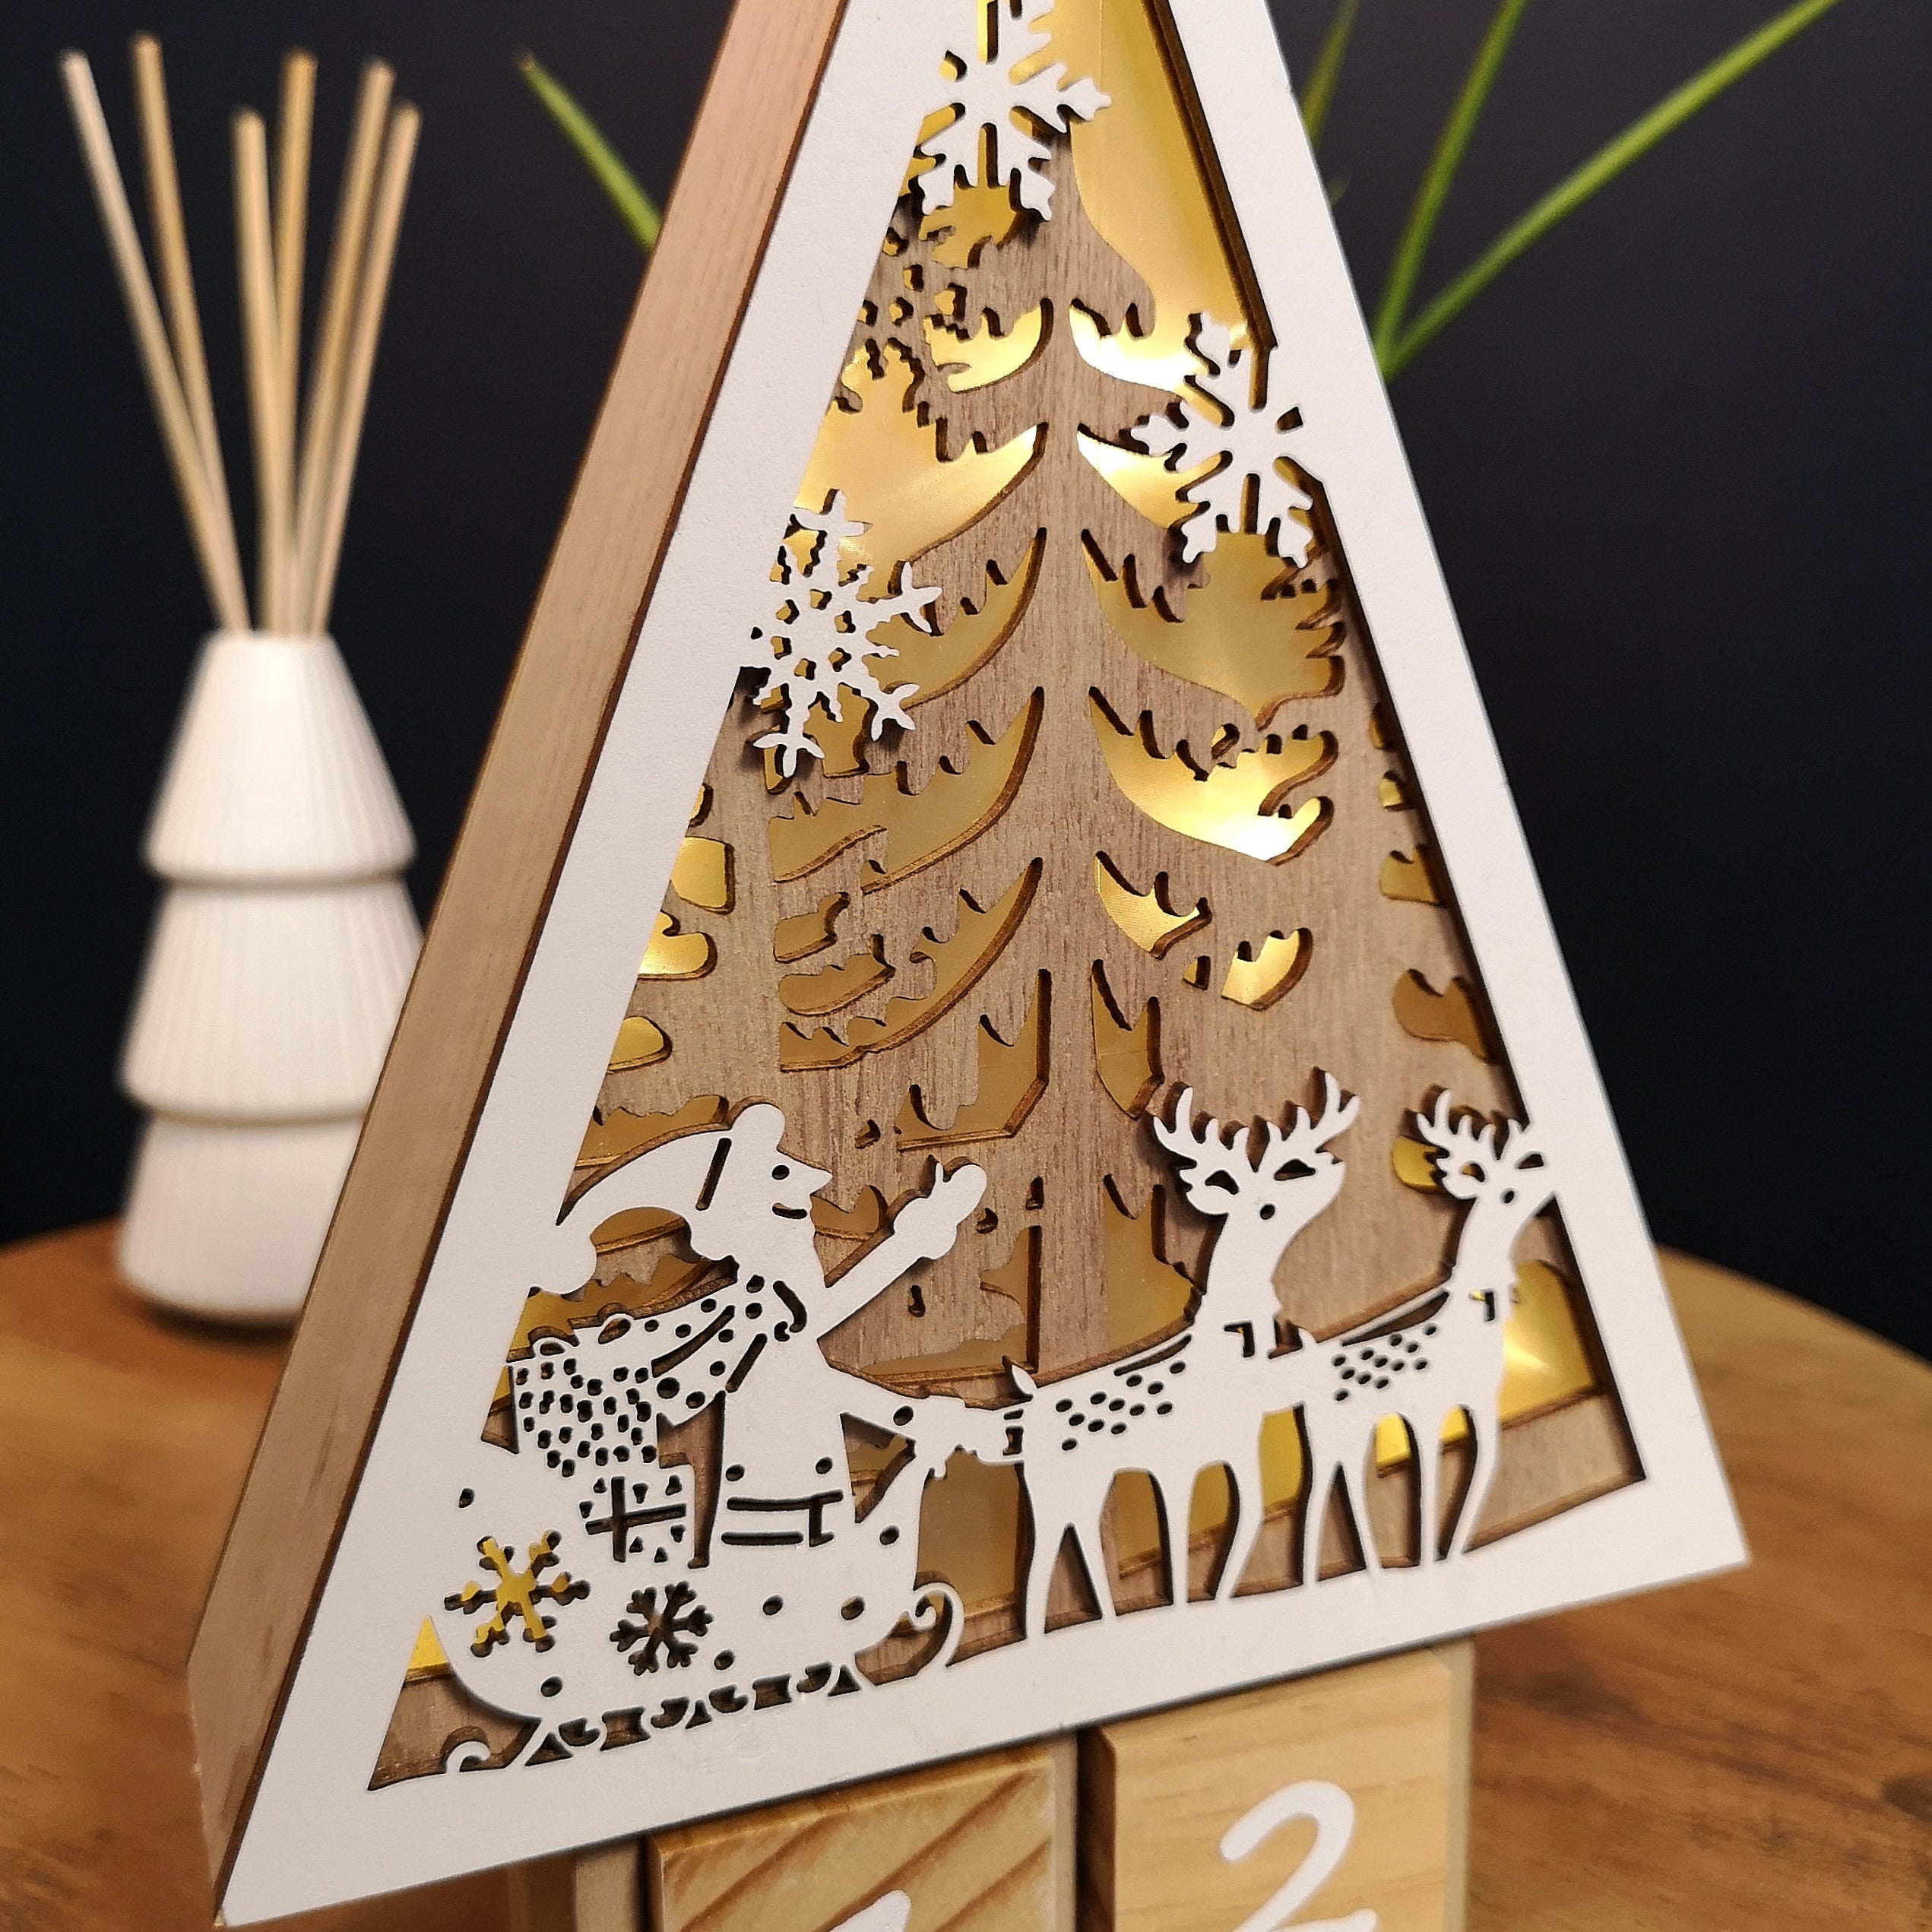 25cm Wooden Christmas Countdown Decoration with Warm White LEDs